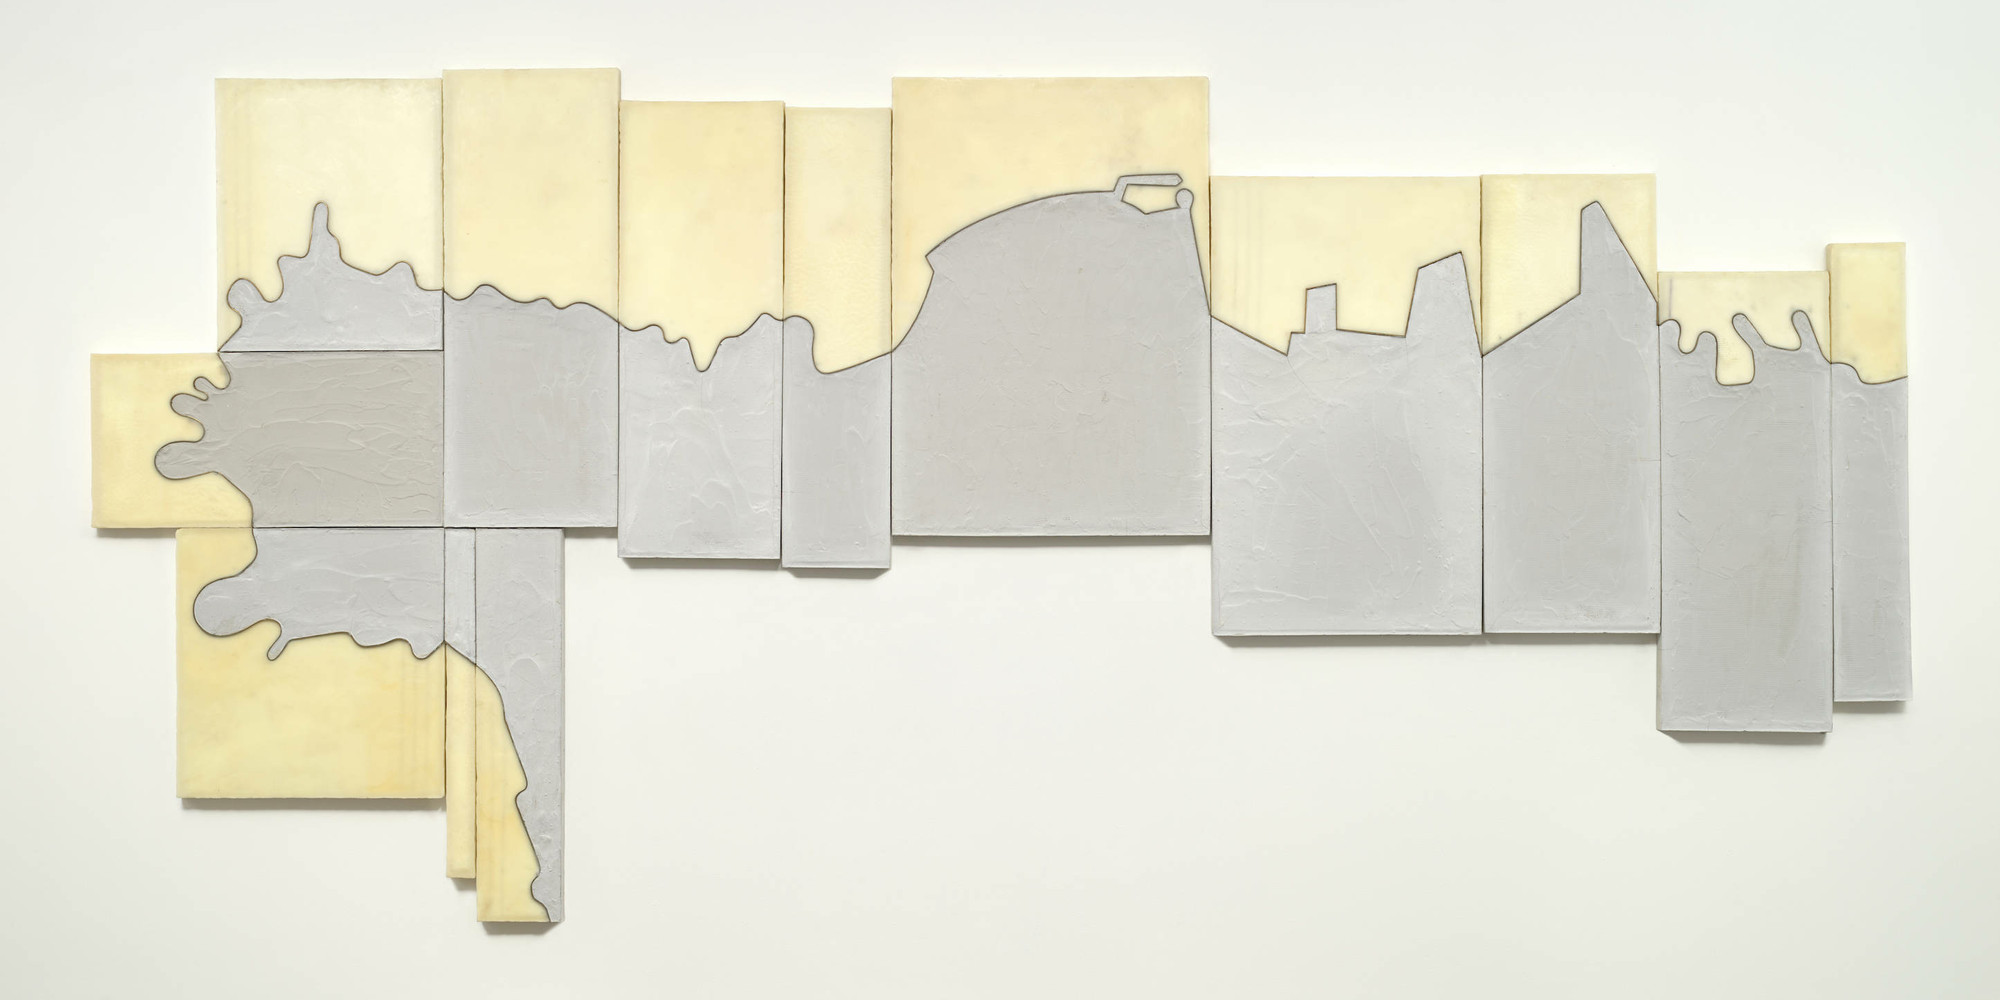 Marwan Rechmaoui. Beirut by the Sea. 2017–19. Concrete, beeswax, and brass on wood, 13 panels, 105 1/2 × 234 7/8 × 1 15/16&#34; (267.9 × 596.6 × 5 cm). The Museum of Modern Art, New York. Fund for the Twenty-First Century. Courtesy of the artist and Sfeir-Semler Gallery, Beirut/Hamburg